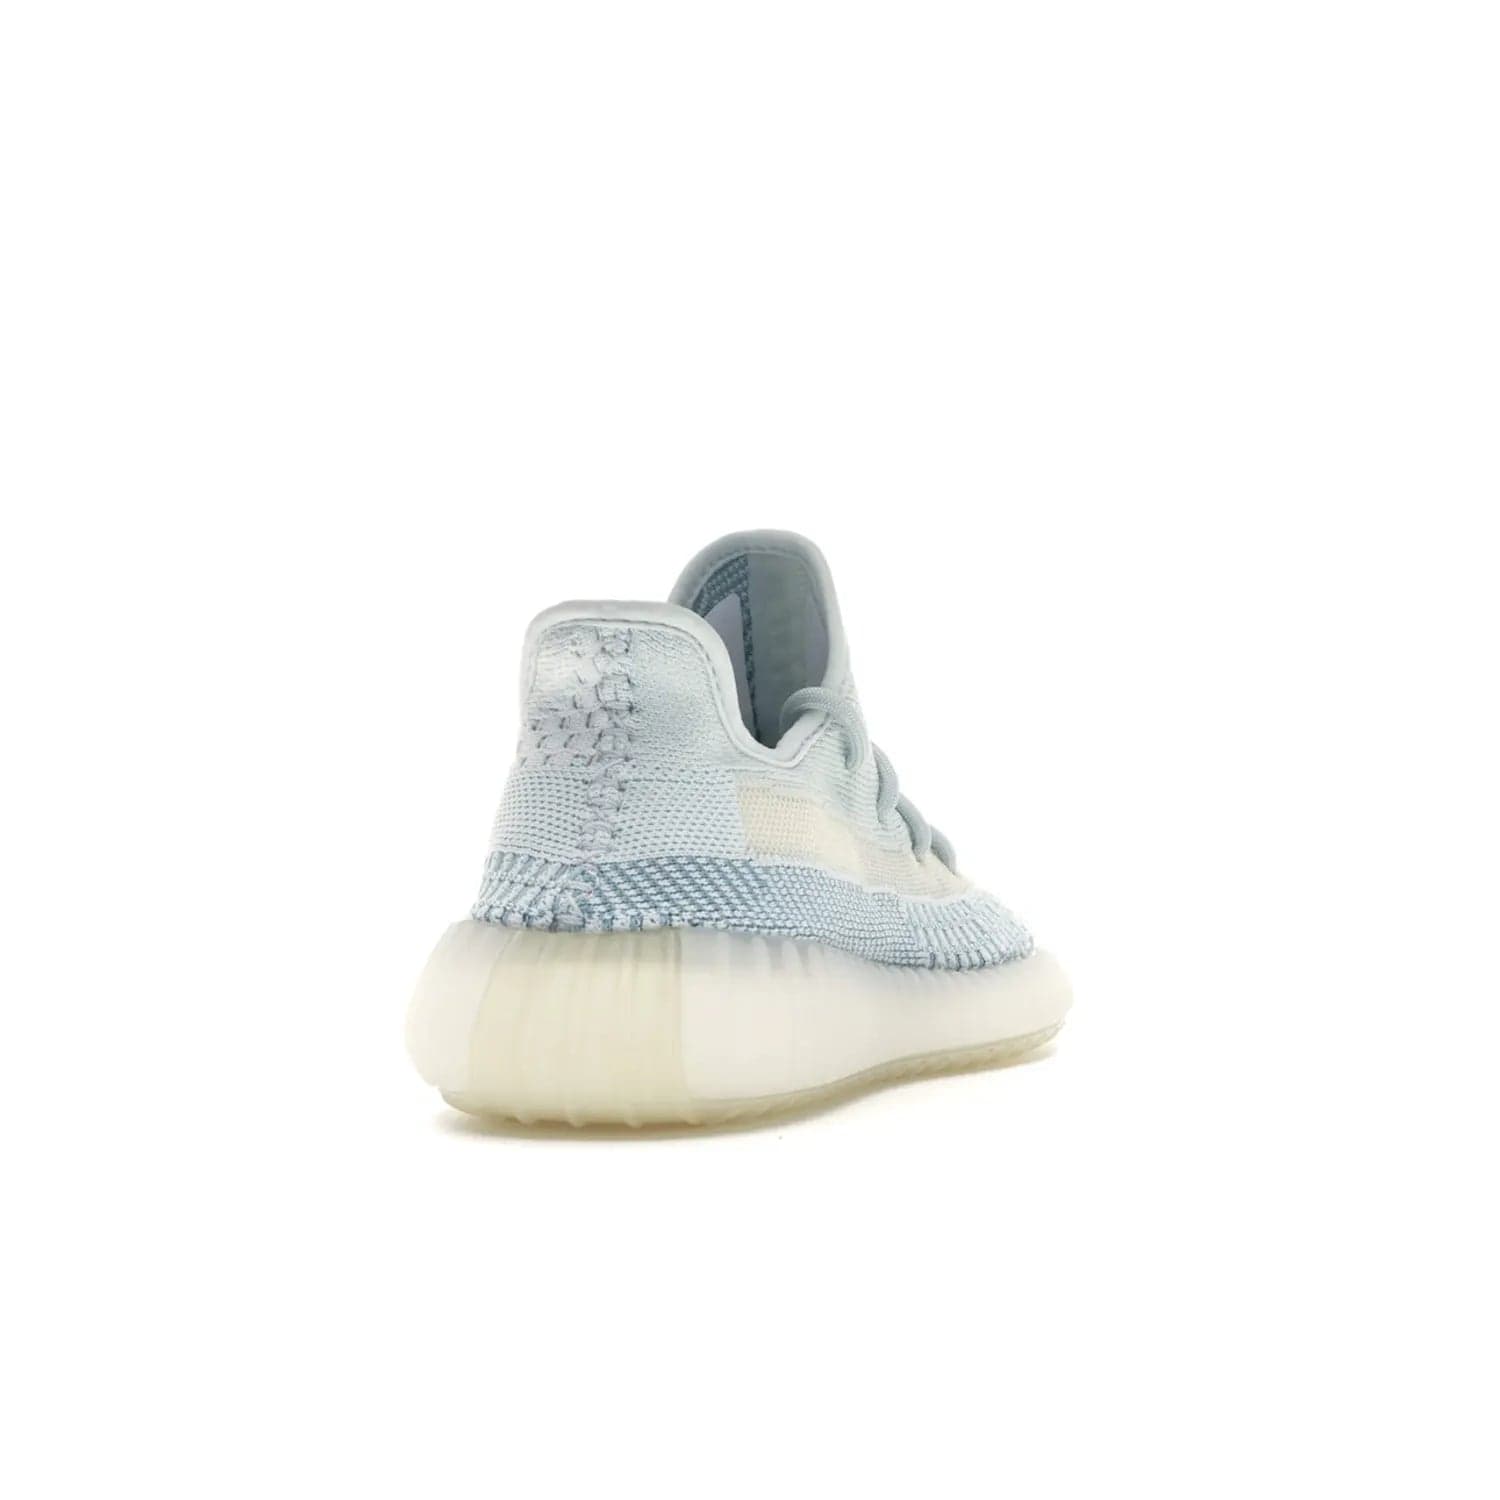 adidas Yeezy Boost 350 V2 Cloud White (Non-Reflective) - Image 30 - Only at www.BallersClubKickz.com - Adidas Yeezy Boost 350 V2 Cloud White (Non-Reflective) features Primeknit fabric and a unique, eye-catching design of cream, bluish-white, and transparent strip. Step out in timeless style with this eye-catching sneaker.